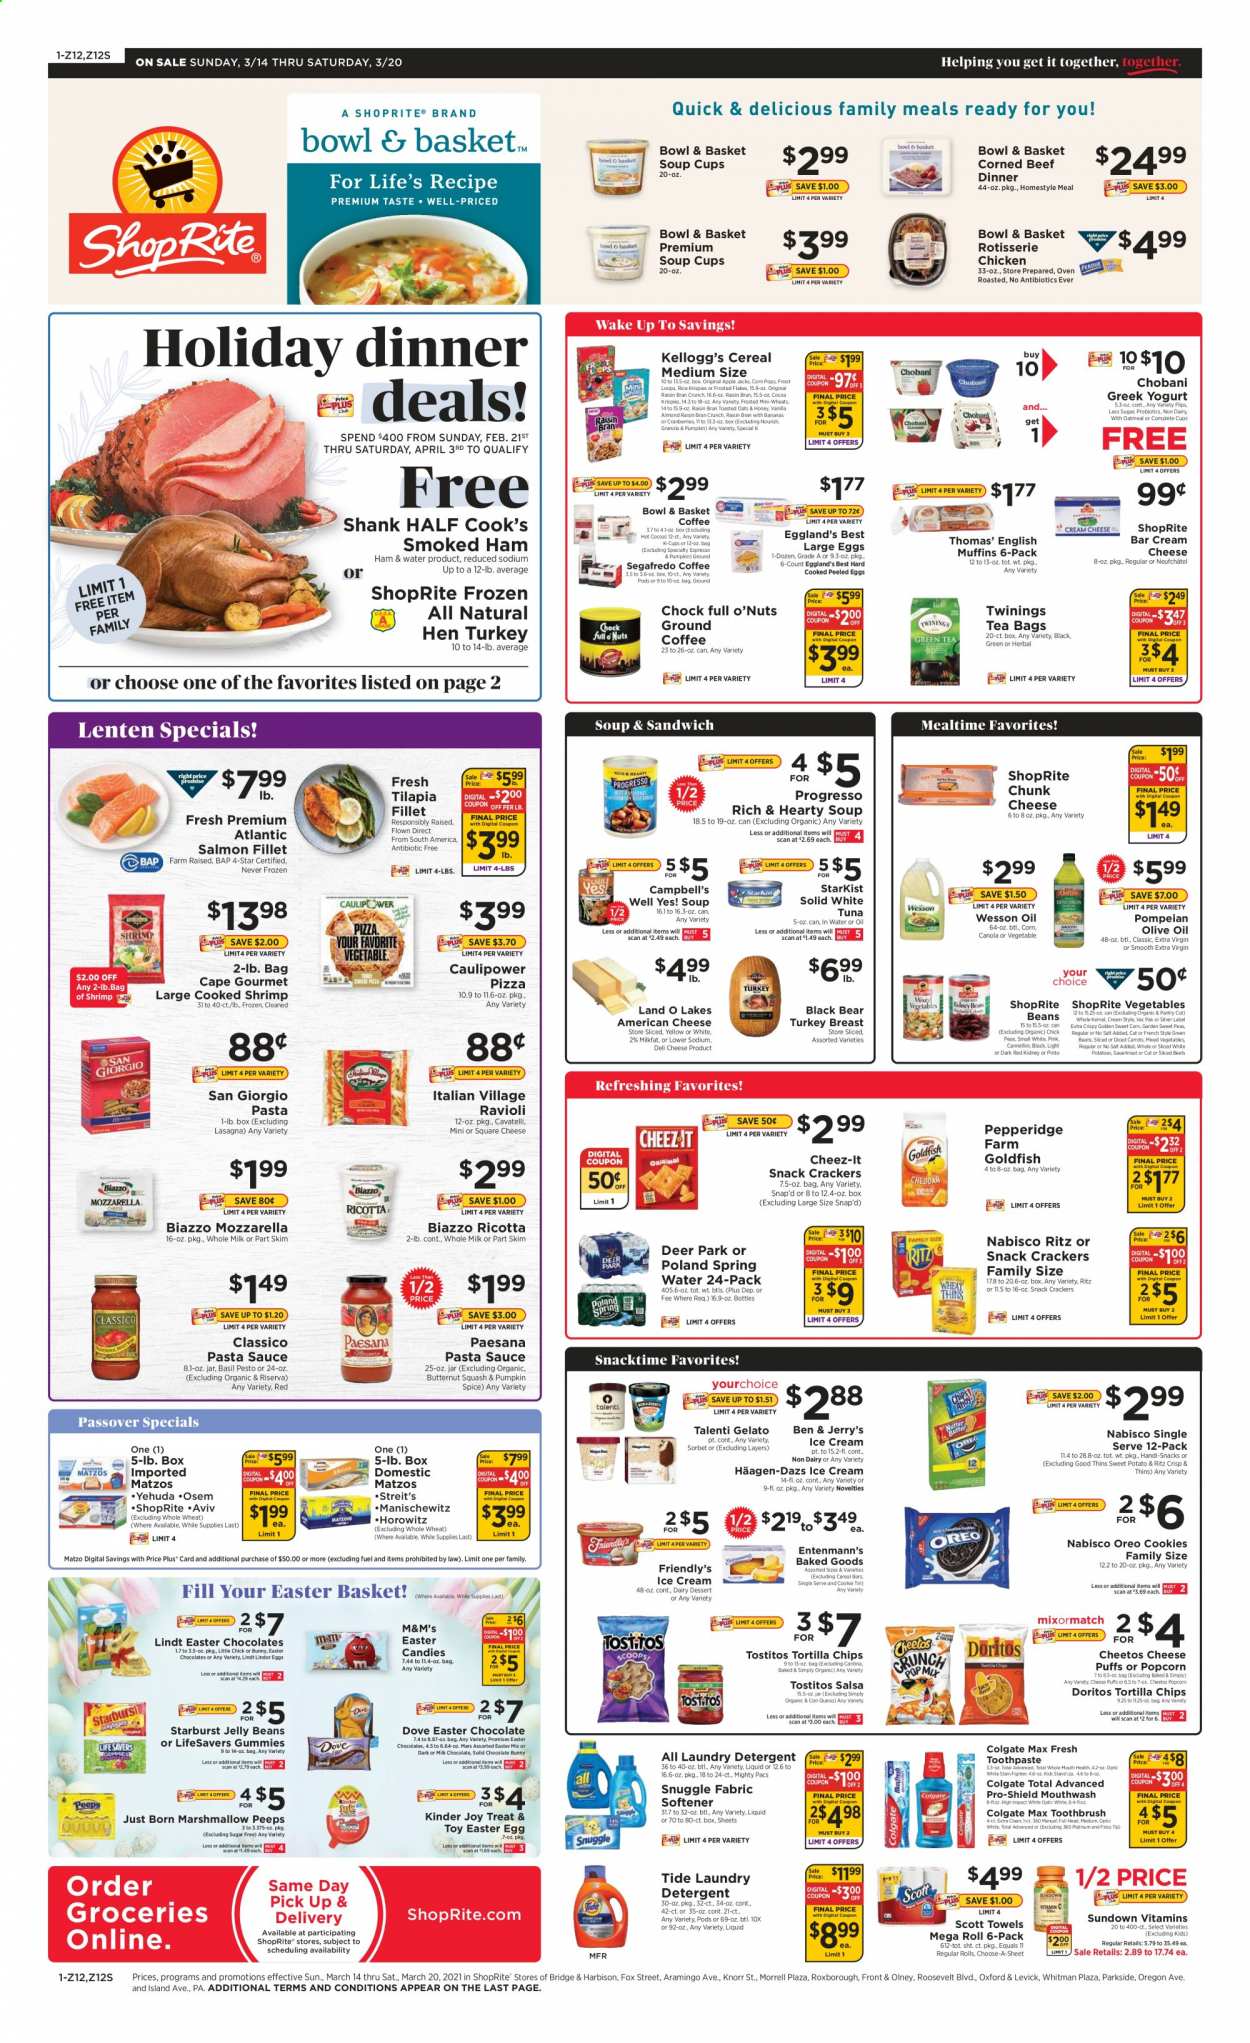 ShopRite Flyer - 03/14/2021 - 03/20/2021 - Sales products - rolls, Entenmann's, salmon, salmon fillet, tilapia, tuna, shrimps, StarKist, Campbell's, cream cheese, pizza, sandwich, soup, Knorr, sauce, Progresso, Bowl & Basket, ham, smoked ham, american cheese, mozzarella, Neufchâtel, ricotta, cheese, chunk cheese, greek yoghurt, Oreo, yoghurt, Chobani, large eggs, salsa, ice cream, Häagen-Dazs, Ben & Jerry's, Talenti Gelato, Friendly's Ice Cream, gelato, carrots, peas, mixed vegetables, vegetables, green beans, sweet potato, sweet corn, cookies, marshmallows, milk chocolate, chocolate, candy, Lindt, Lindor, Kinder Joy, Mars, M&M's, cereal bar, crackers, Kellogg's, jelly beans, chocolate bunny, Starburst, Peeps, RITZ, Doritos, tortilla chips, Cheetos, snack, Snacktime, Thins, popcorn, Cheez-It, Tostitos, oatmeal, oats, cranberries, sauerkraut, cereals, granola, Rice Krispies, Frosted Flakes, Corn Pops, Raisin Bran, ravioli, basil, pesto, pasta sauce, extra virgin olive oil, olive oil, honey, almonds, nuts, spring water, hot cocoa, tea bags, Twinings, coffee capsules, K-Cups, Segafredo, Cook's, turkey breast, chicken, turkey meat, beef meat, corned beef, detergent, Snuggle, Tide, fabric softener, laundry detergent, Joy, Dove, Colgate, toothbrush, toothpaste, mouthwash, bowl, Scott, probiotics. Page 1.